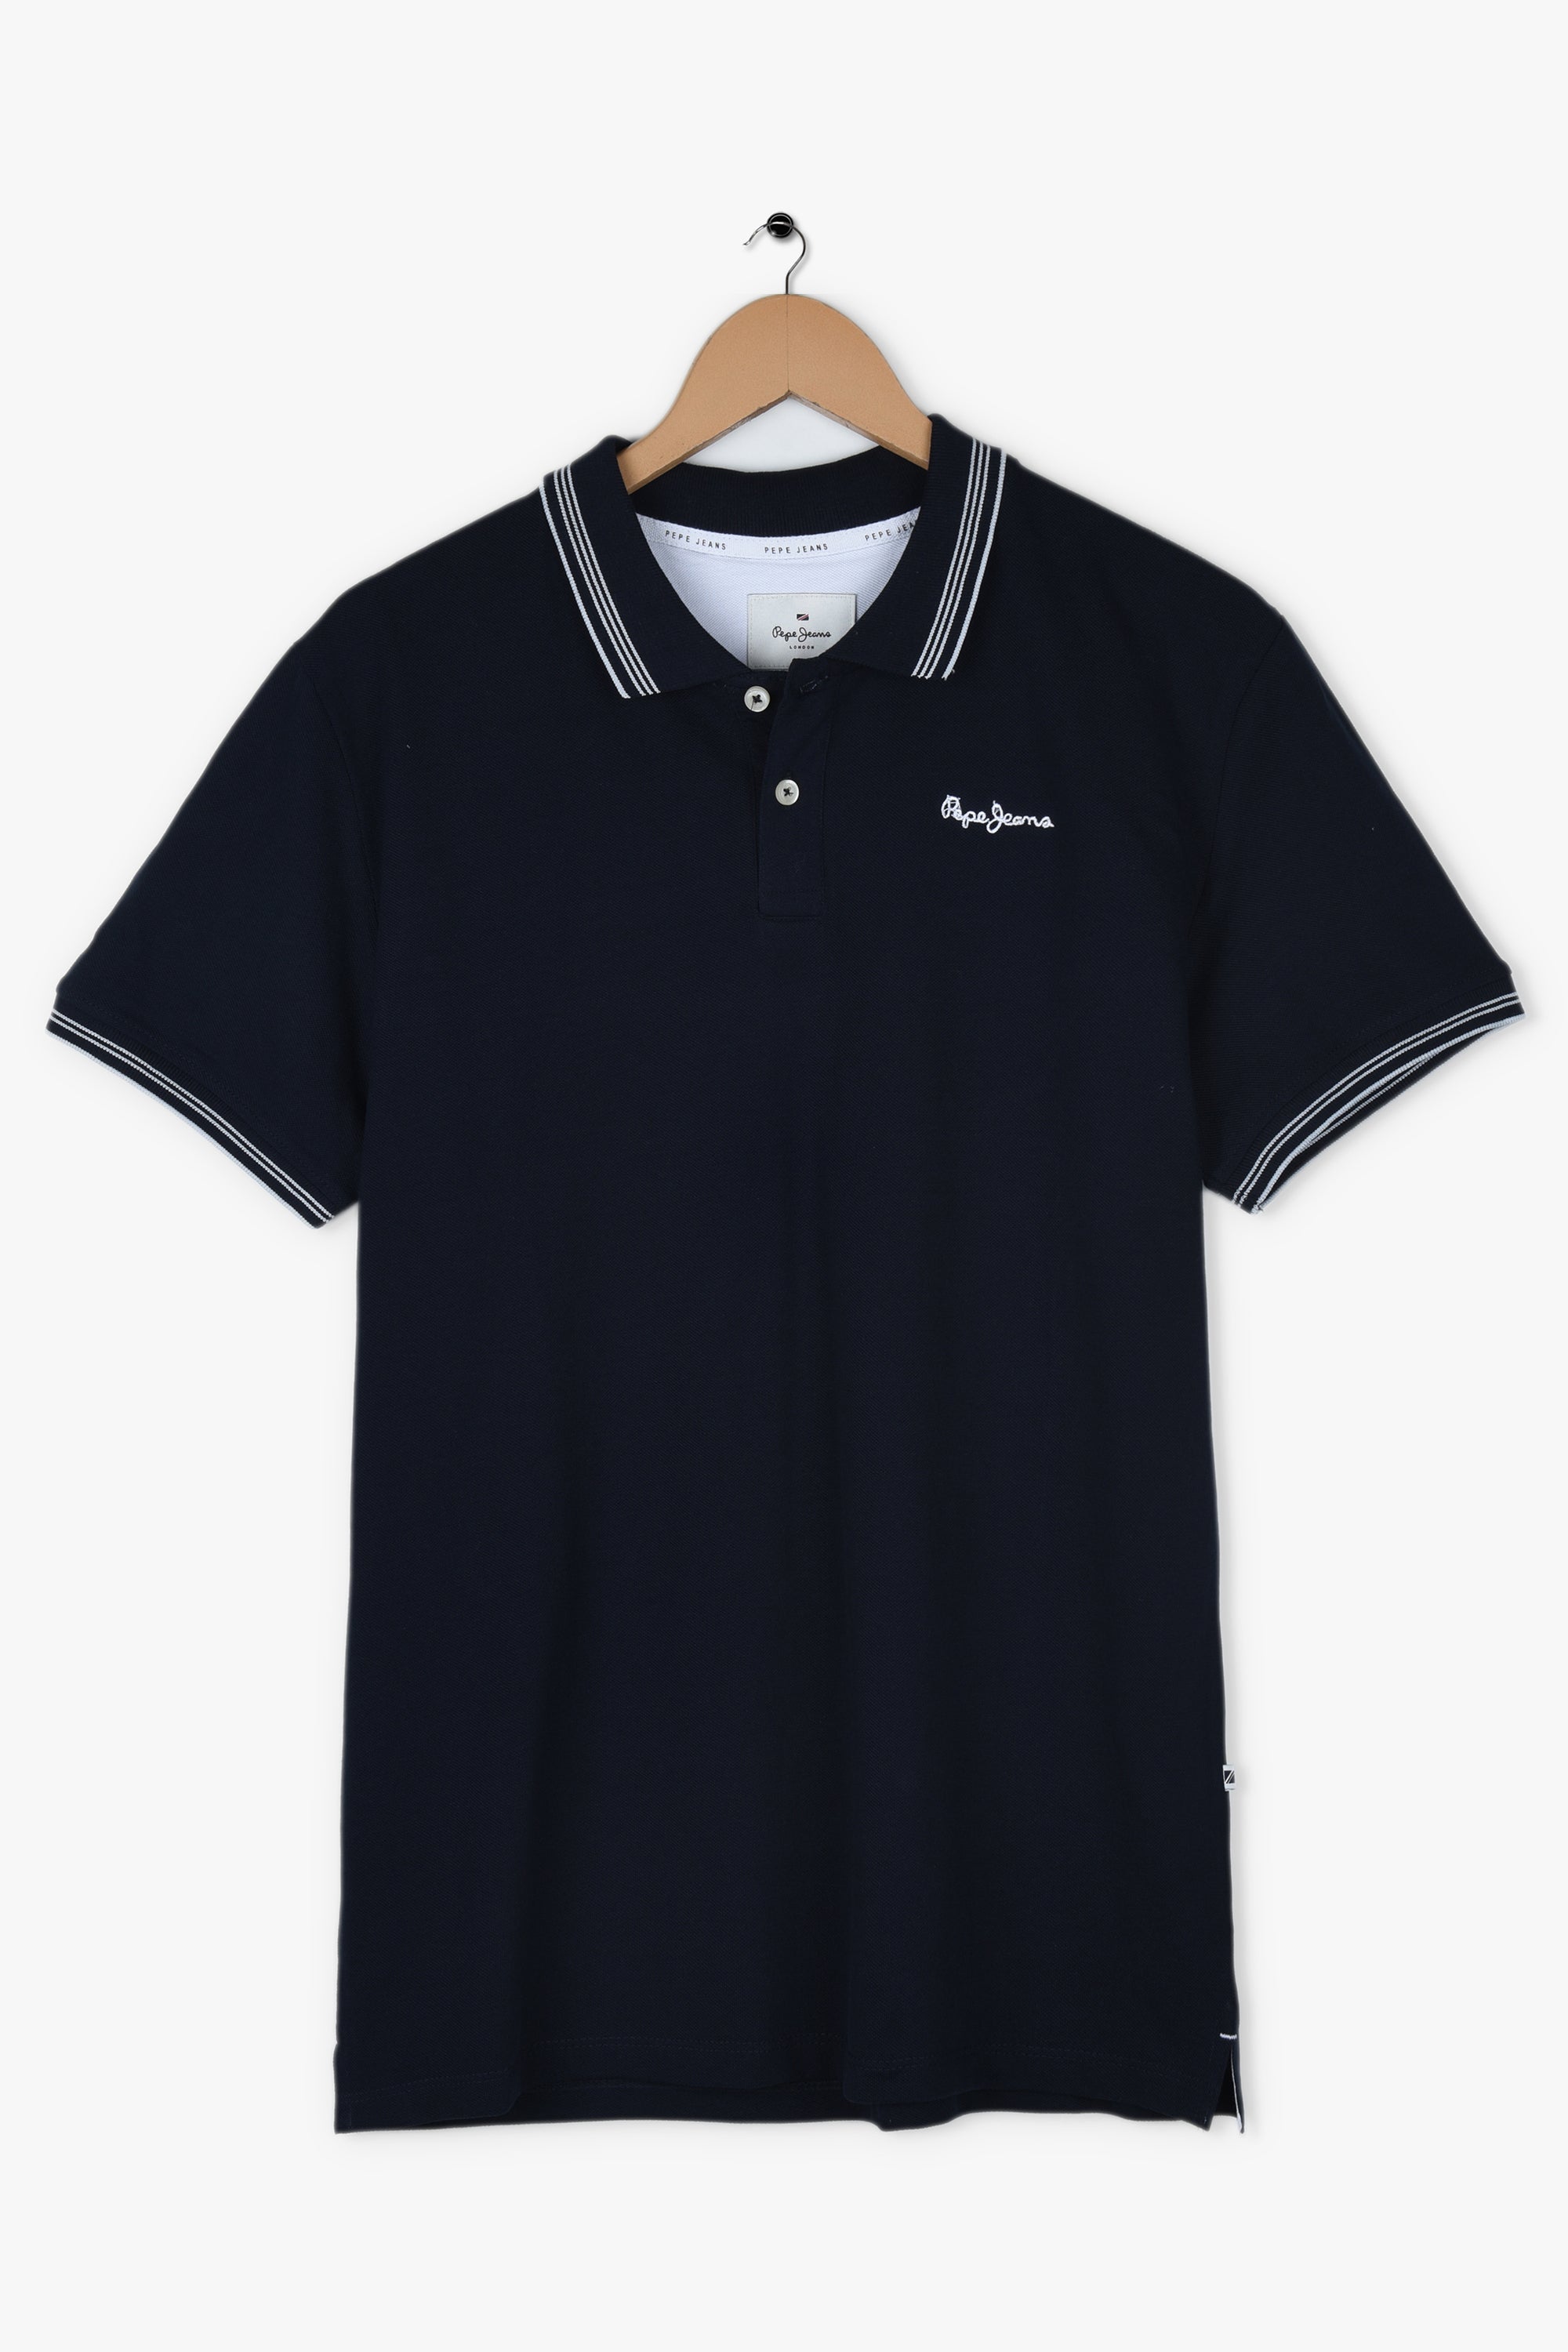 PEPE JEANS STRIPED COLLAR POLO SHIRT